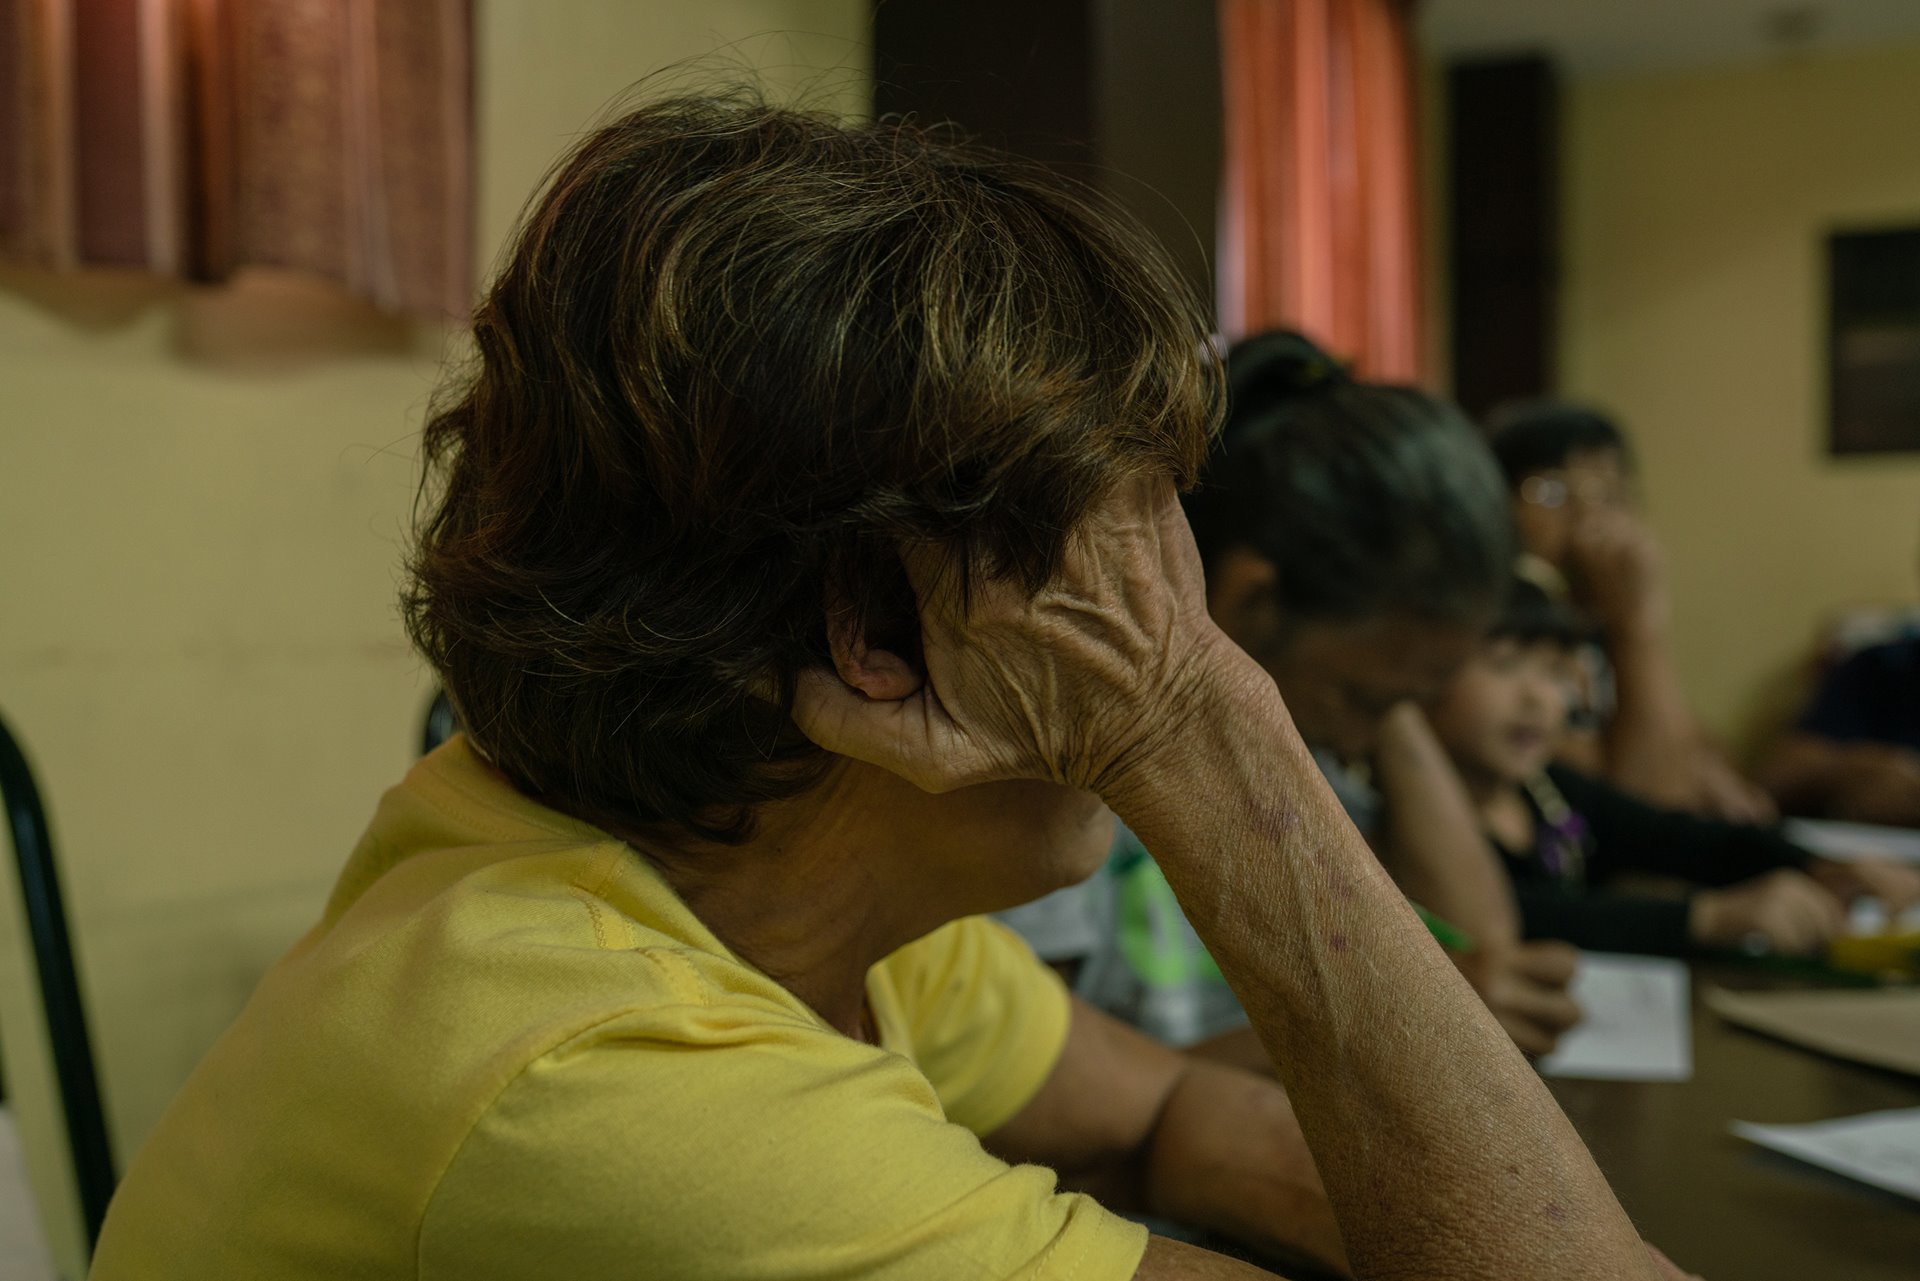 Lorna Reyes attends grief counseling for war-on-drugs victims in Manila, the Philippines. Her two sons, Manuel and Ryan, have been missing since February 2019, when they were abducted by people driving a white van.